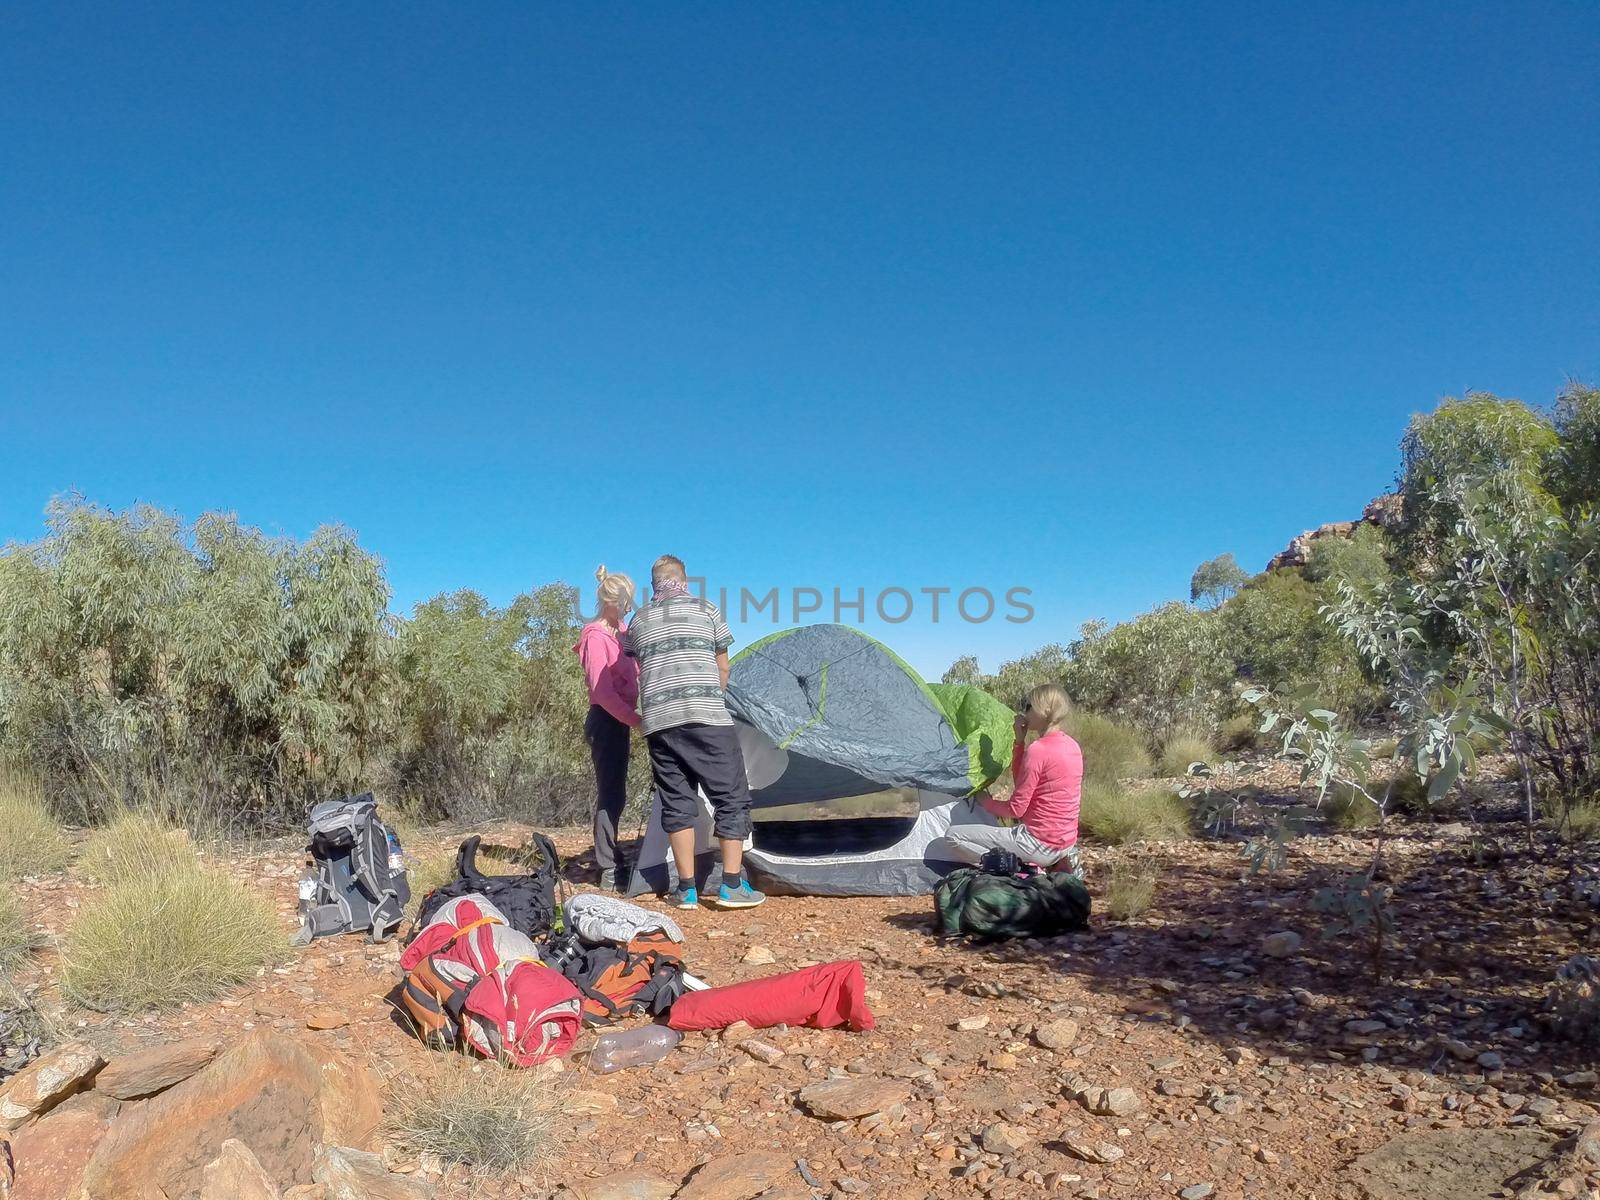 group of hikers putting up a tent in the dessert, Australia by bettercallcurry